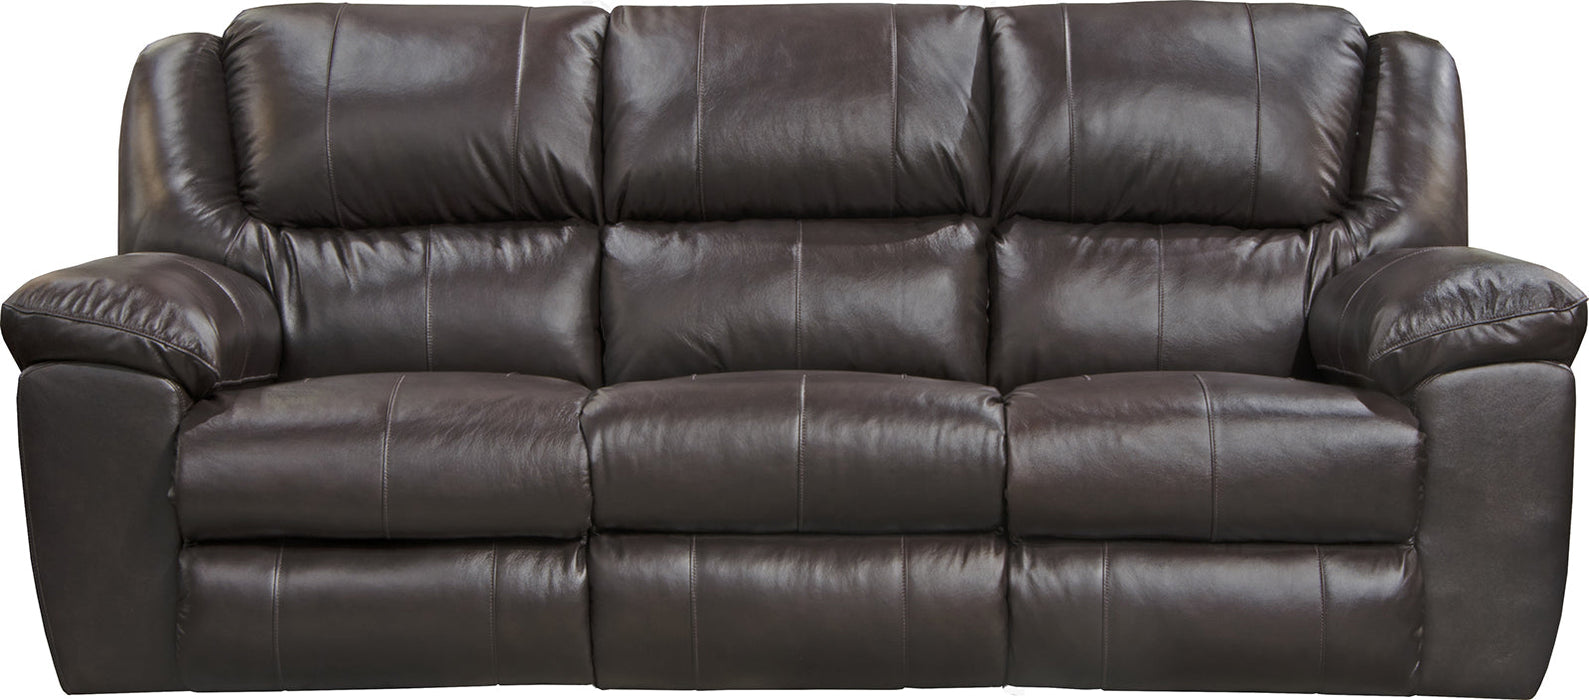 Catnapper Furniture Transformer II Ultimate Sofa with 3 Recliners and Drop Down Table in Chocolate image